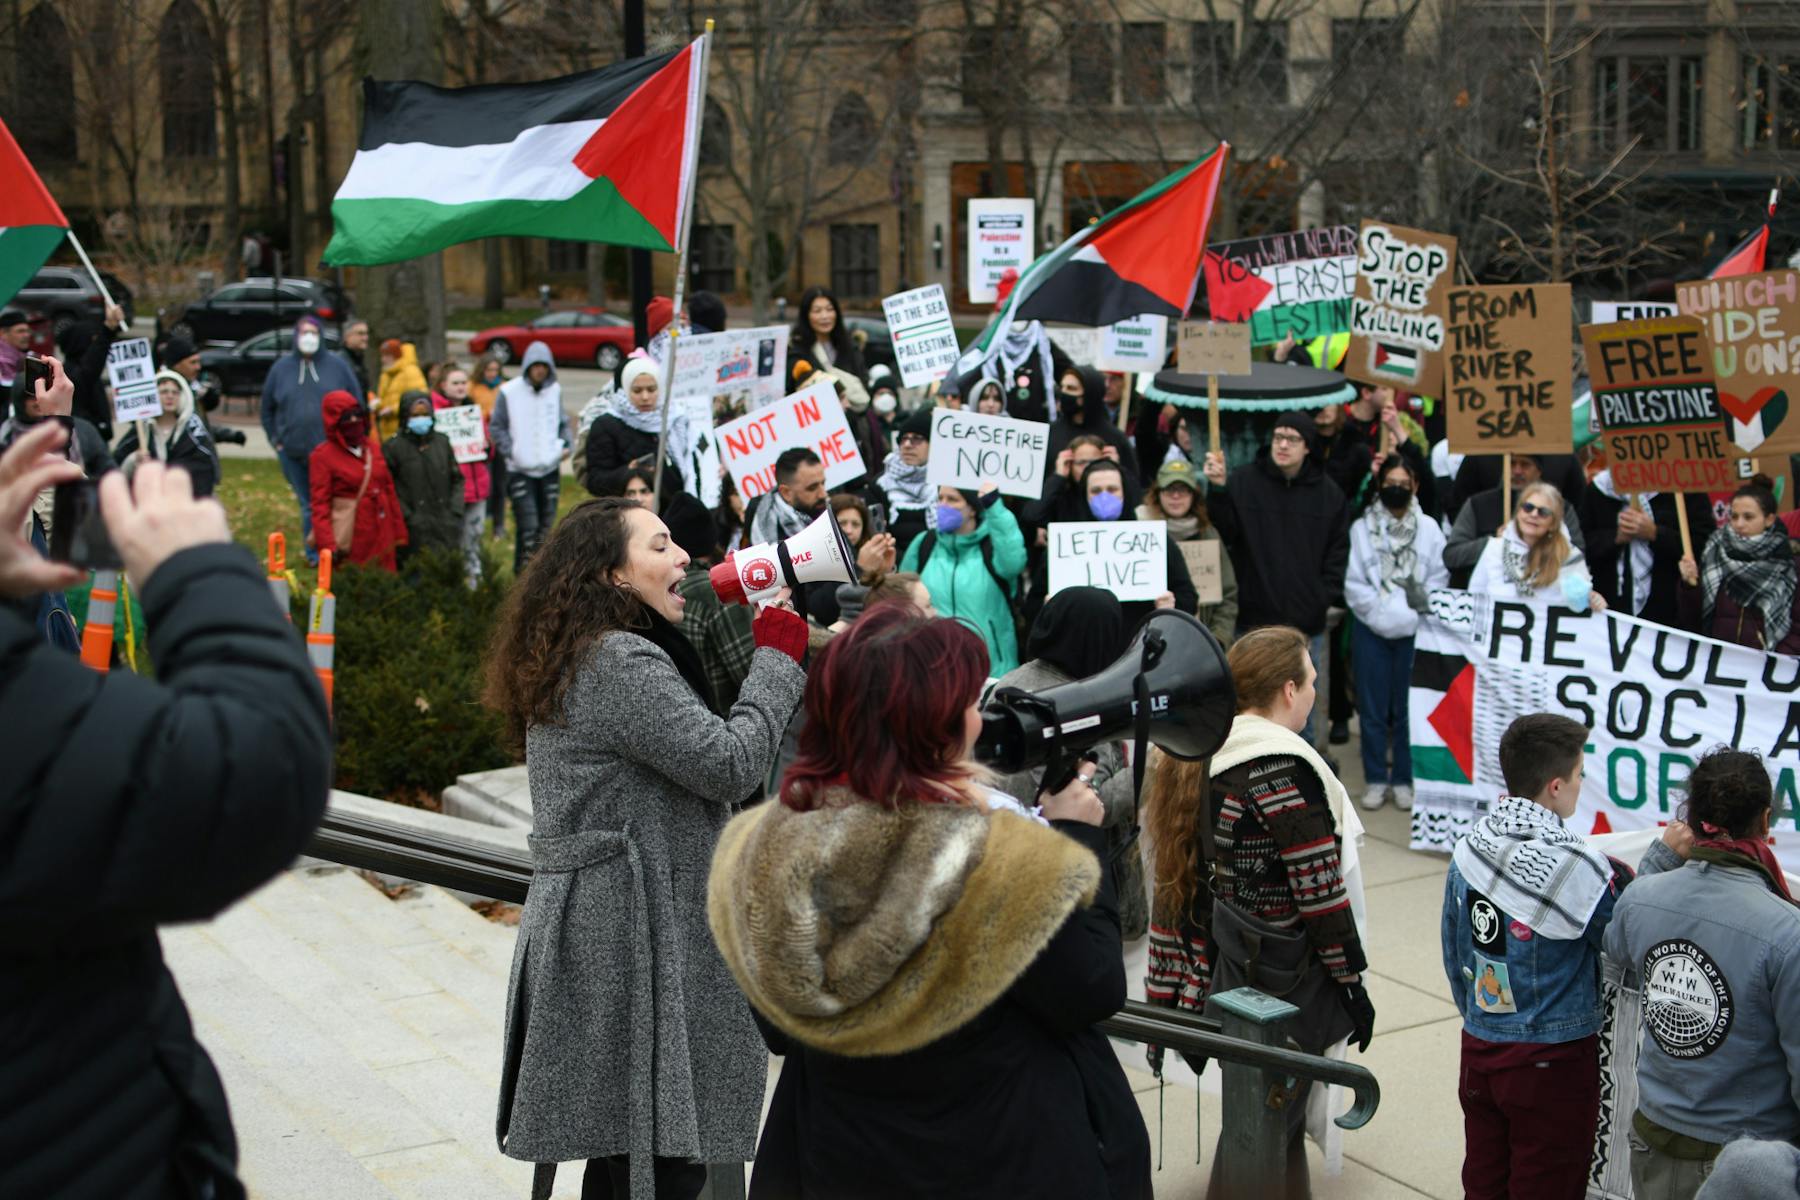 Madison, WI: Historic march for Palestine in state capitol draws